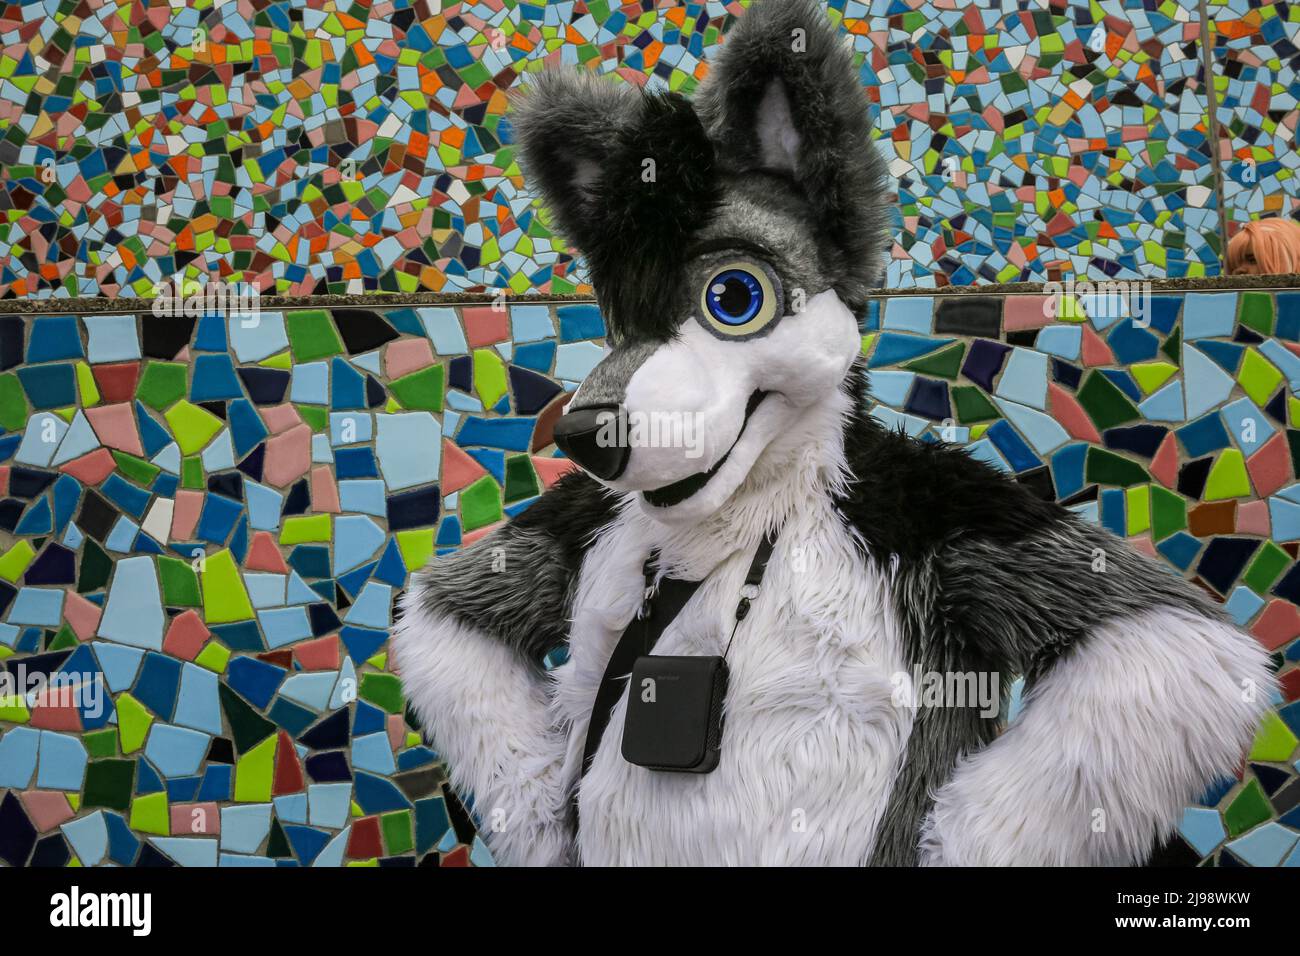 Düsseldorf, NRW, Germany. 21st May, 2022. A cosplayer in fur suit. Cosplayers happily pose along the mosaic wall on the riverbank. Tens of thousands of visitors and cosplayers enjoy the warm sunshine along the river Rhine embankment in their outfits inspired by Japanese anime, video and games. Stage performances, cosplay, stalls and demonstrations of Japanese culture, sports and traditions are featured at Düsseldorf's annual Japan Day, celebrating Japan and the Japanese community in the city. Düsseldorf is home to the largest Japanese community in Germany. Credit: Imageplotter/Alamy Live News Stock Photo